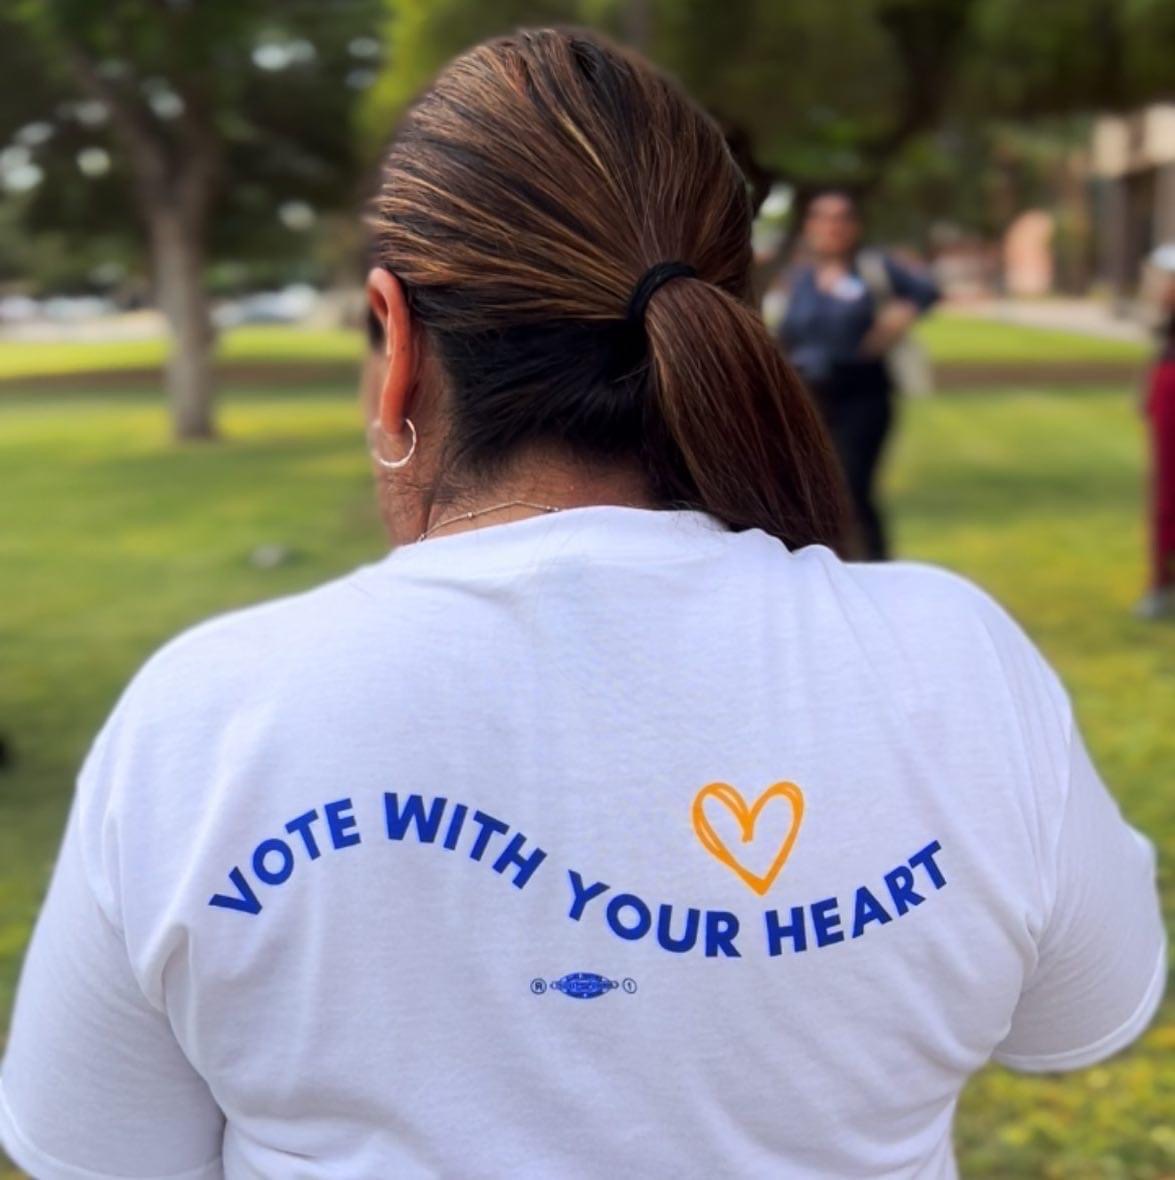 Young Dreamers Drive Latino Electoral Enthusiasm in Arizona